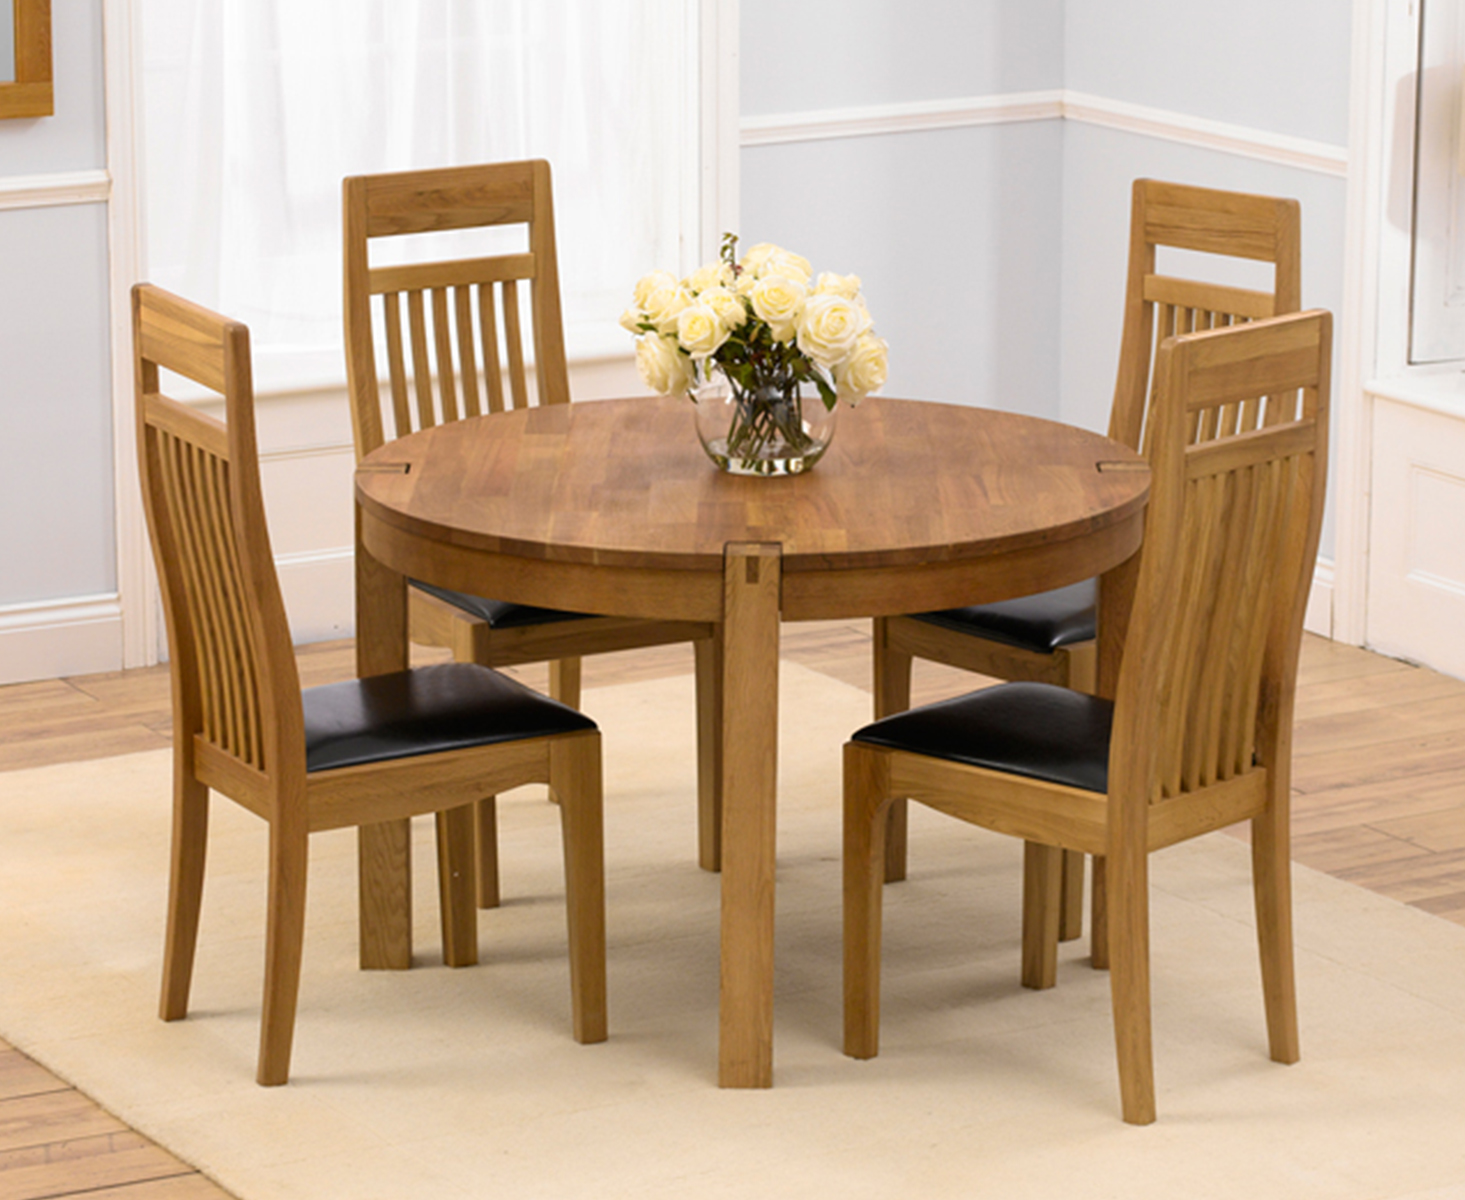 Verona 110cm Solid Oak Round Dining Table With 4 Brown Monaco Chairs